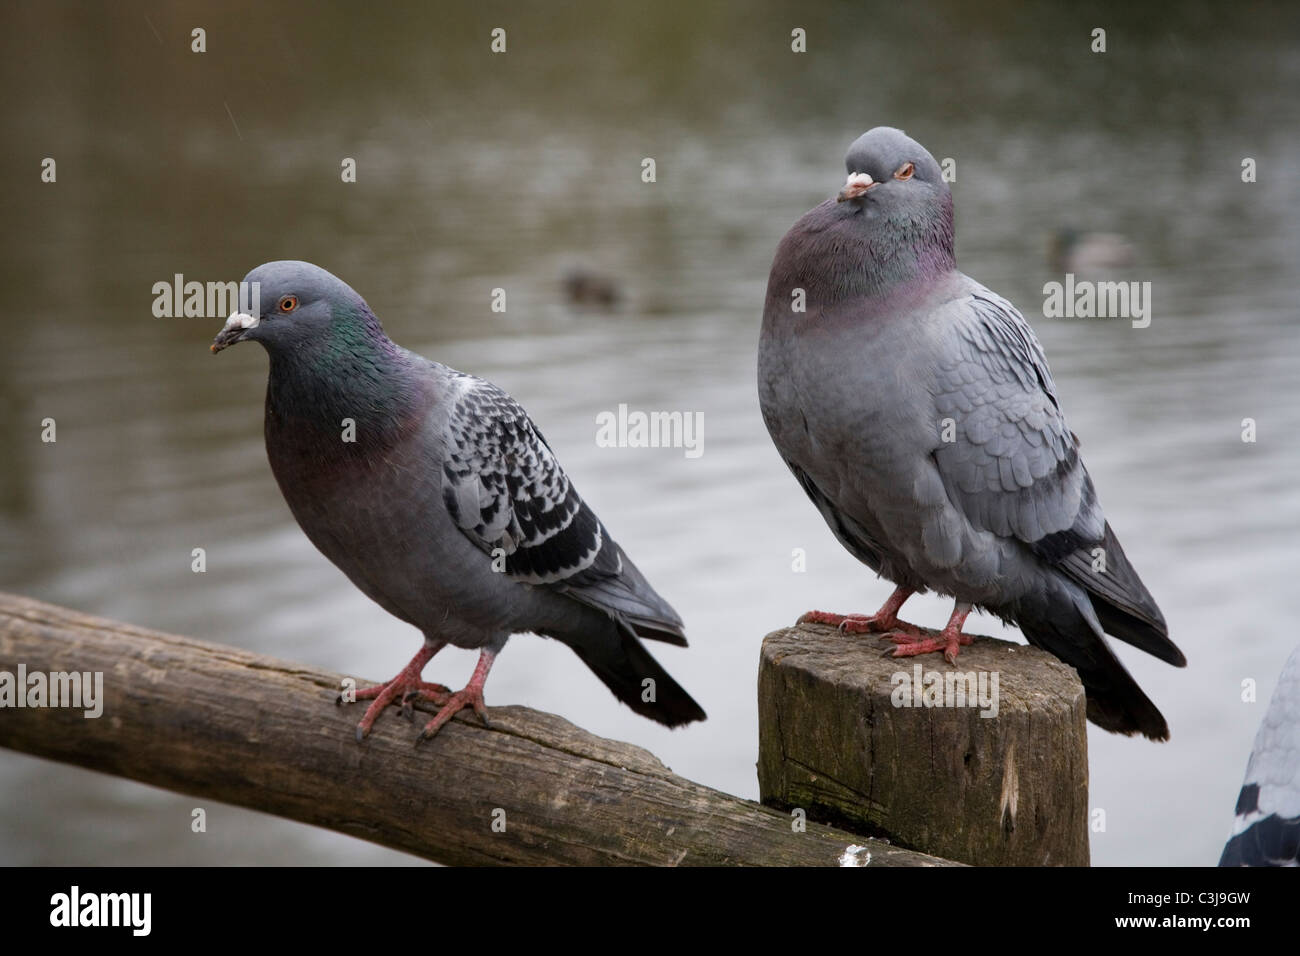 Two pigeons Stock Photo